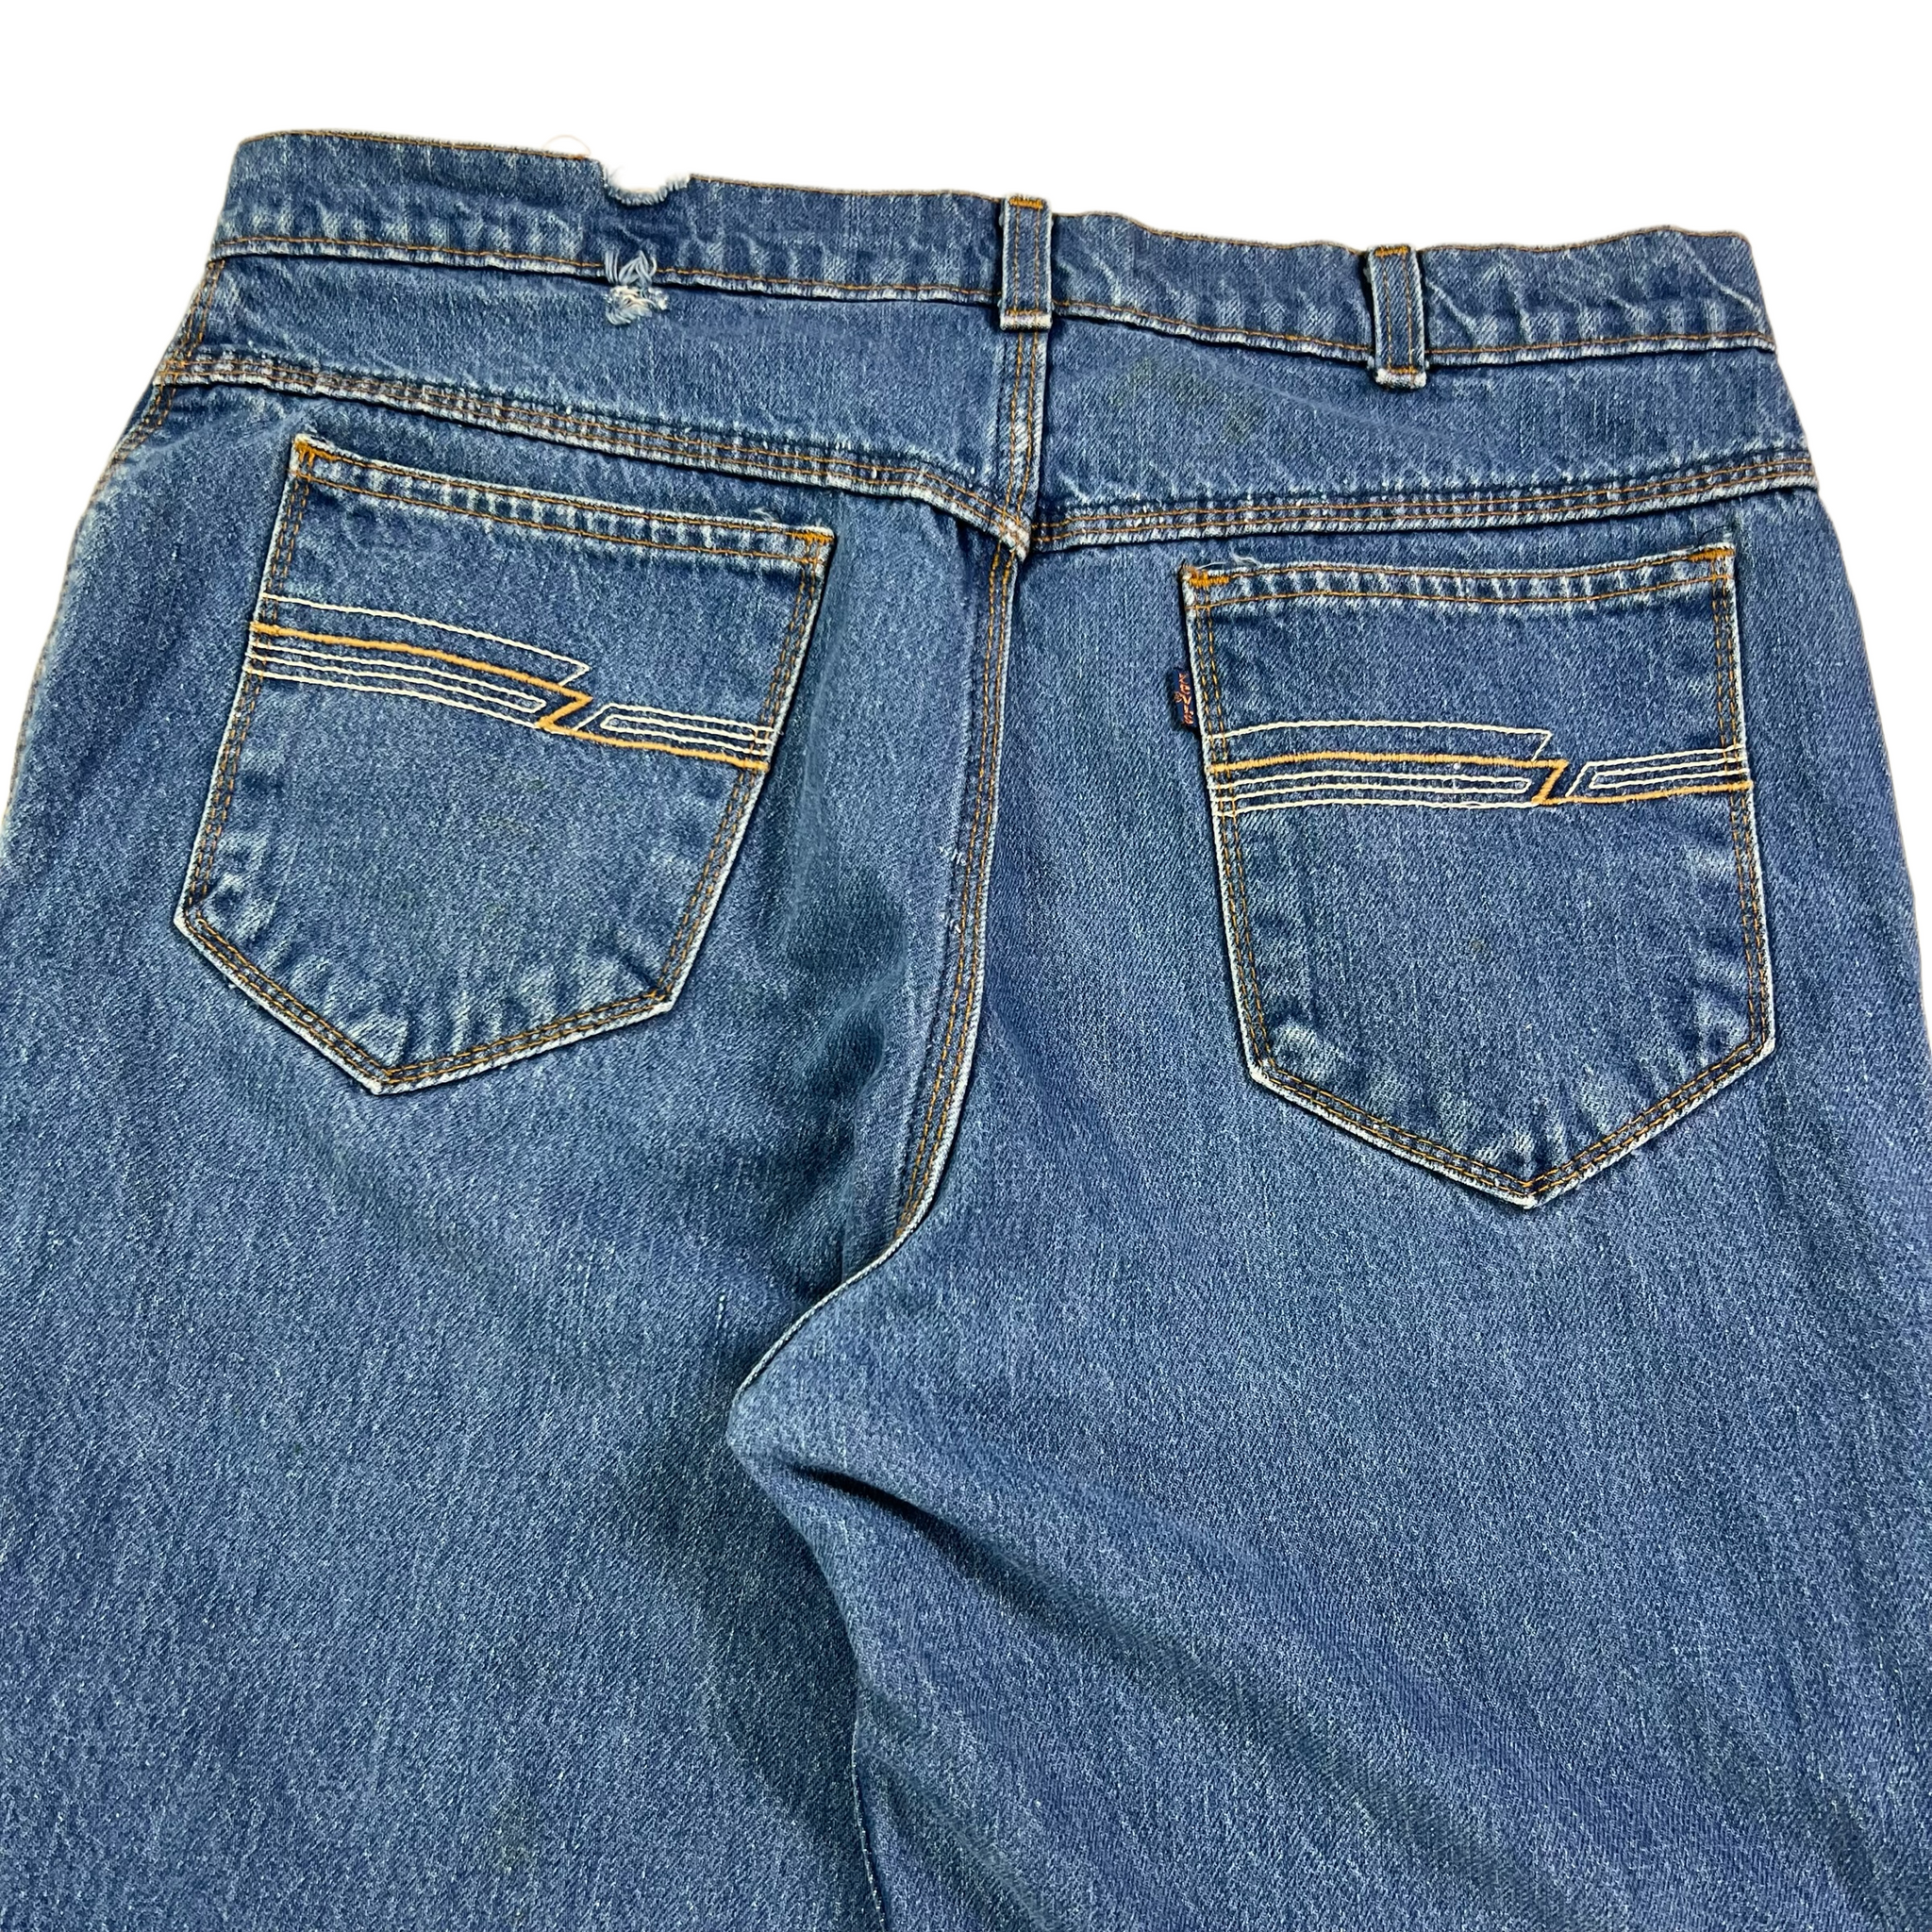 Vintage 80s Levi's Movin' On navy tab arcuate distressed denim jeans ( –  The Retro Recovery